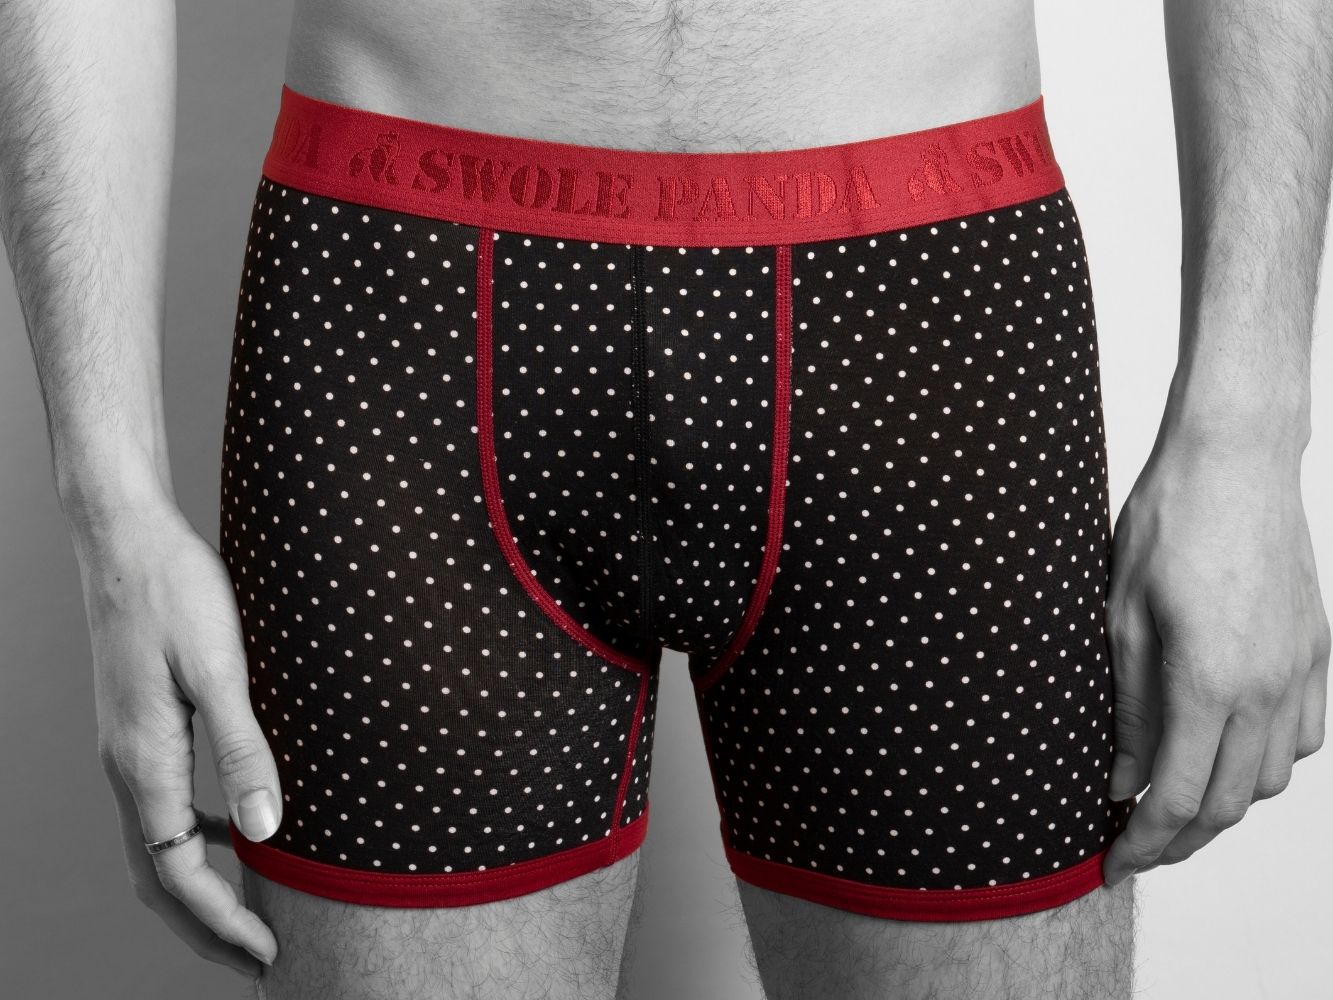 Bamboo Boxers - White Dots